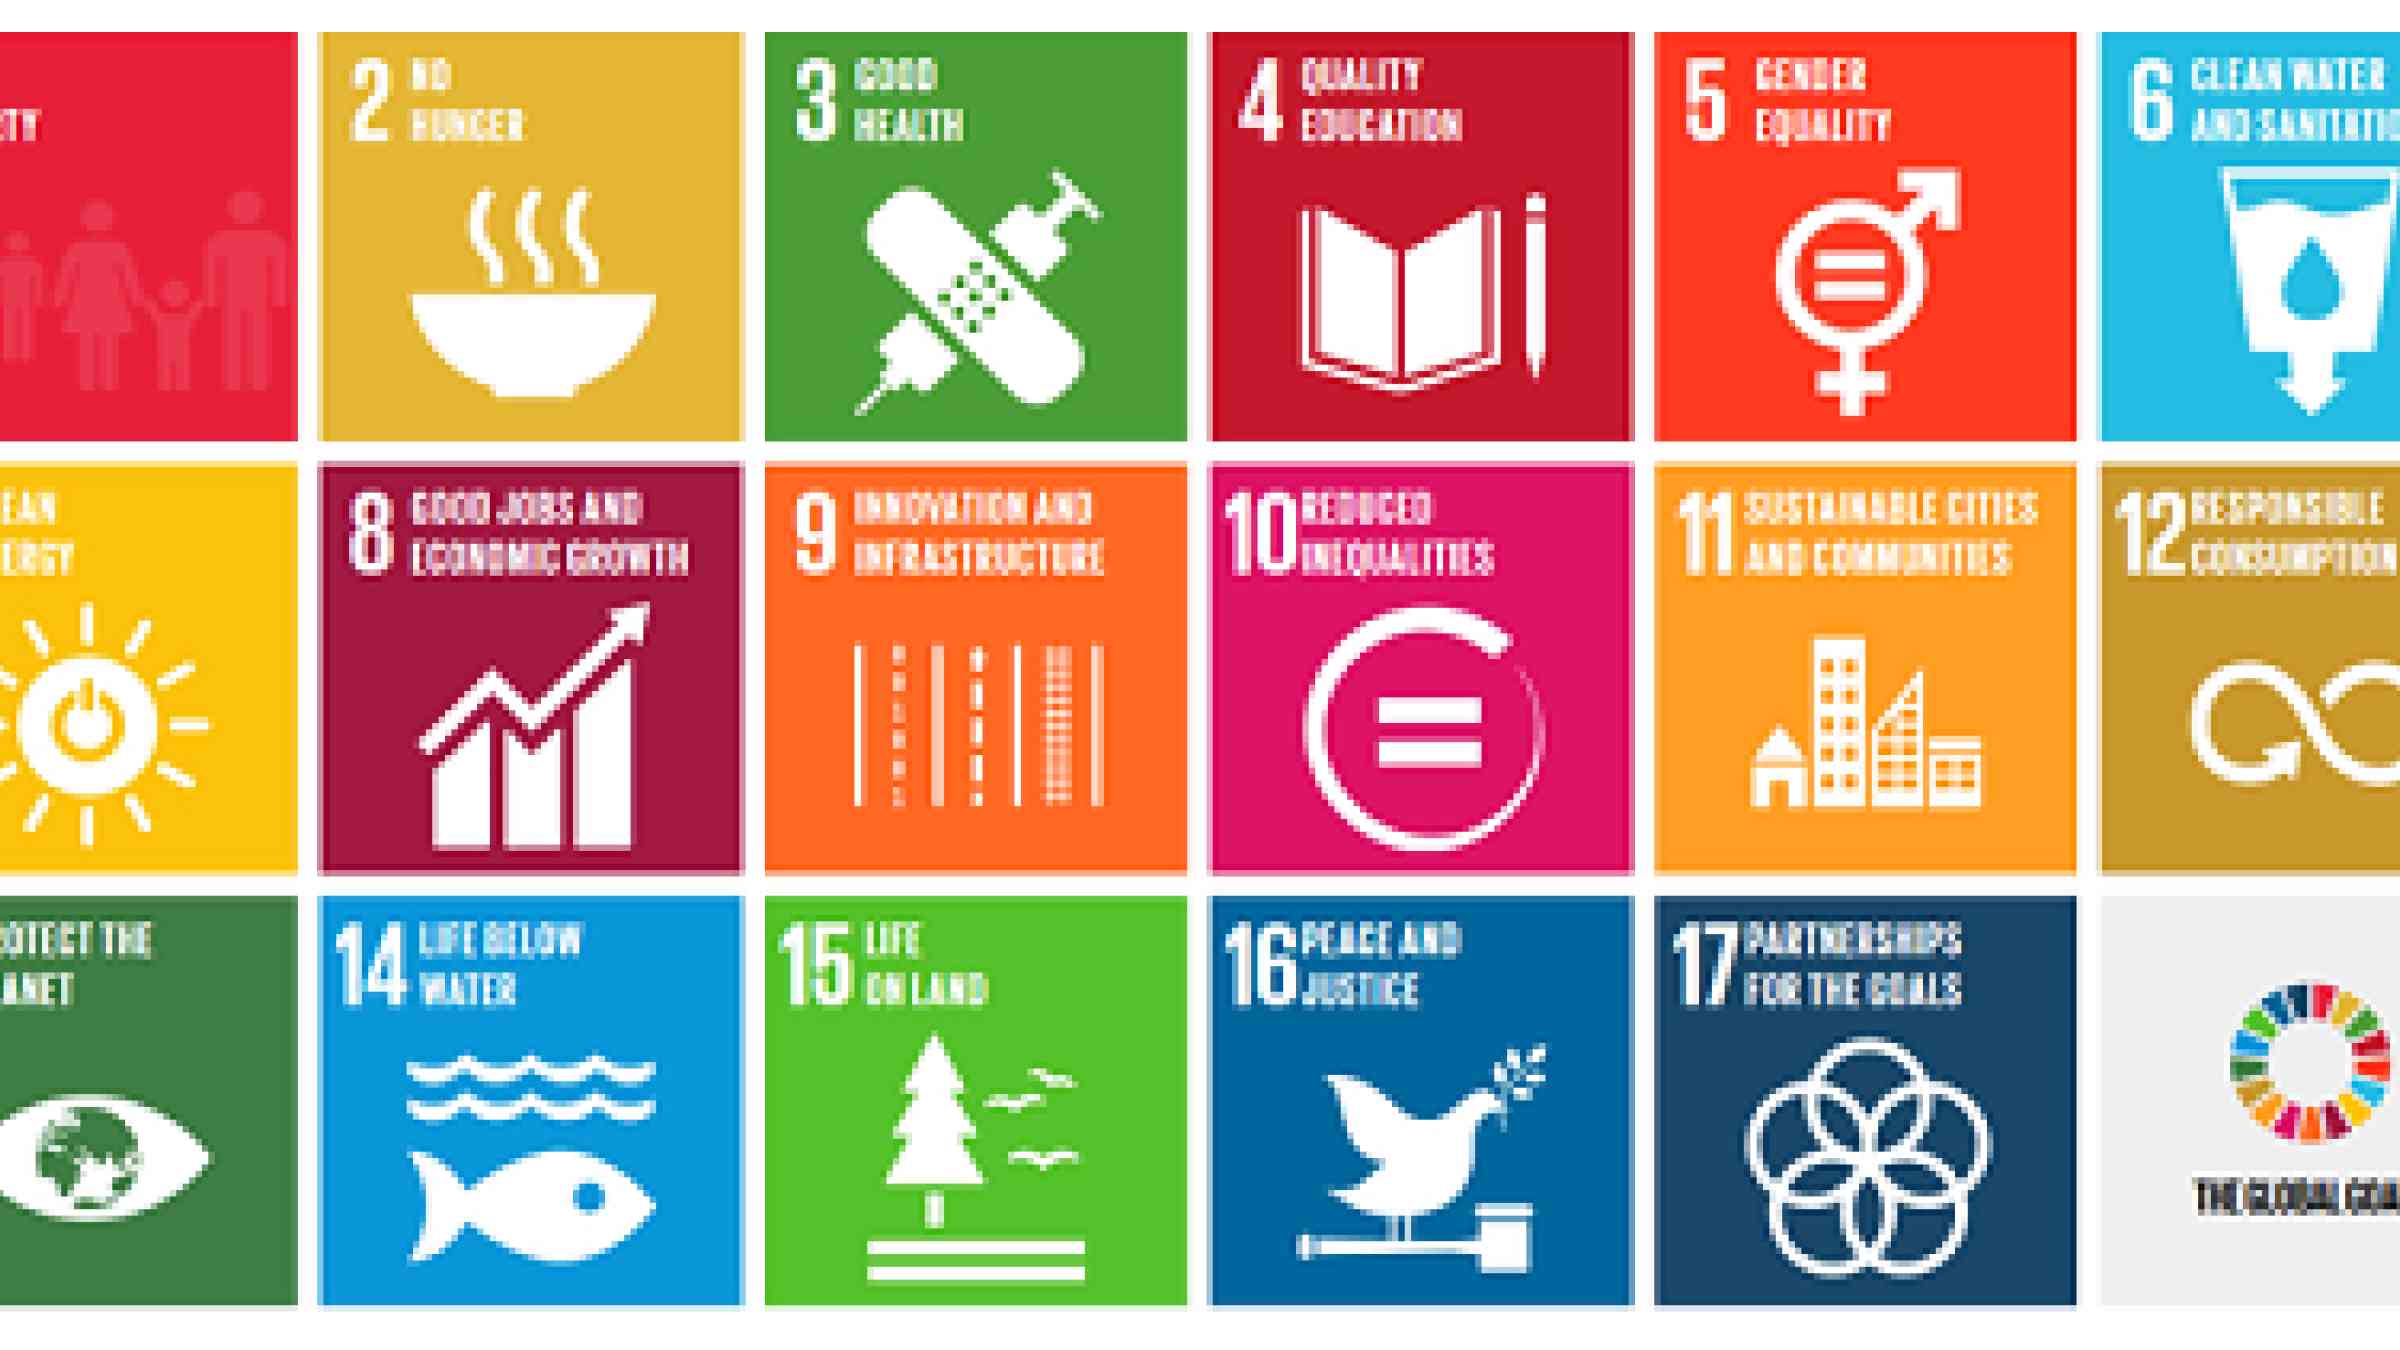 The new sustainable development agenda is made of up 17 cross-cutting goals